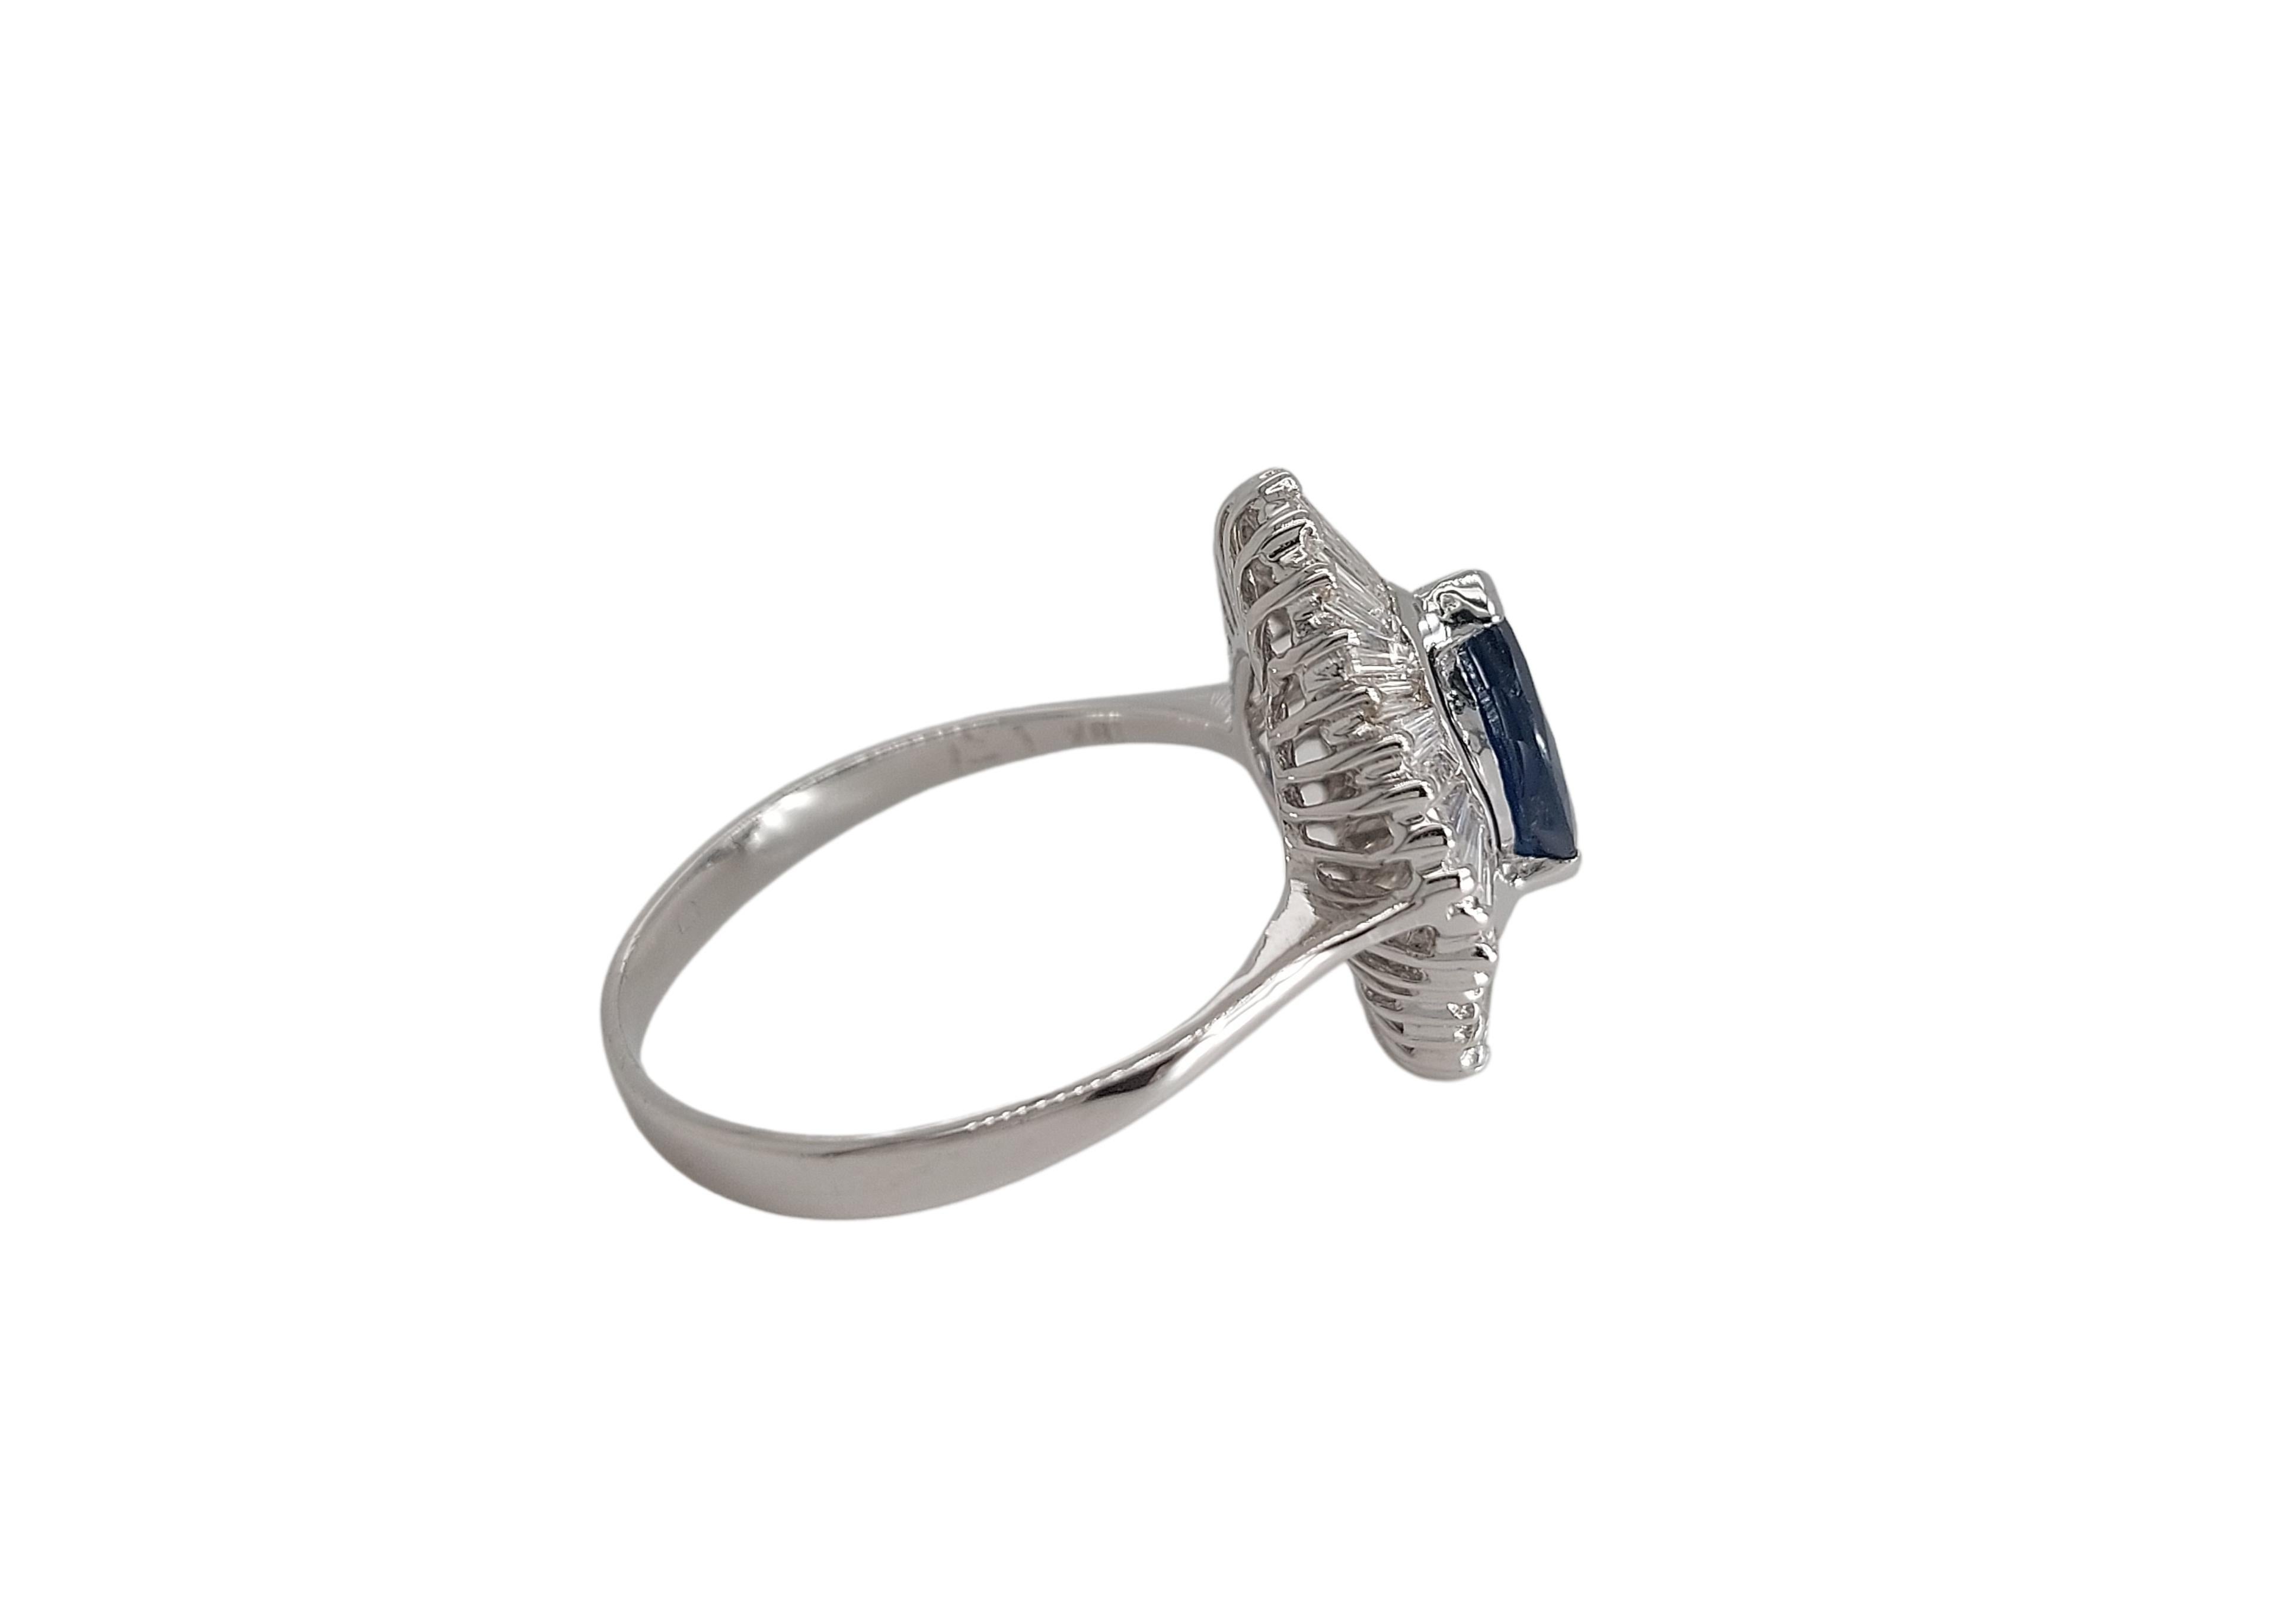 Women's 18kt White Gold Ring with 1.02ct Marquise Cut Sapphire and 2.4ct Diamonds For Sale